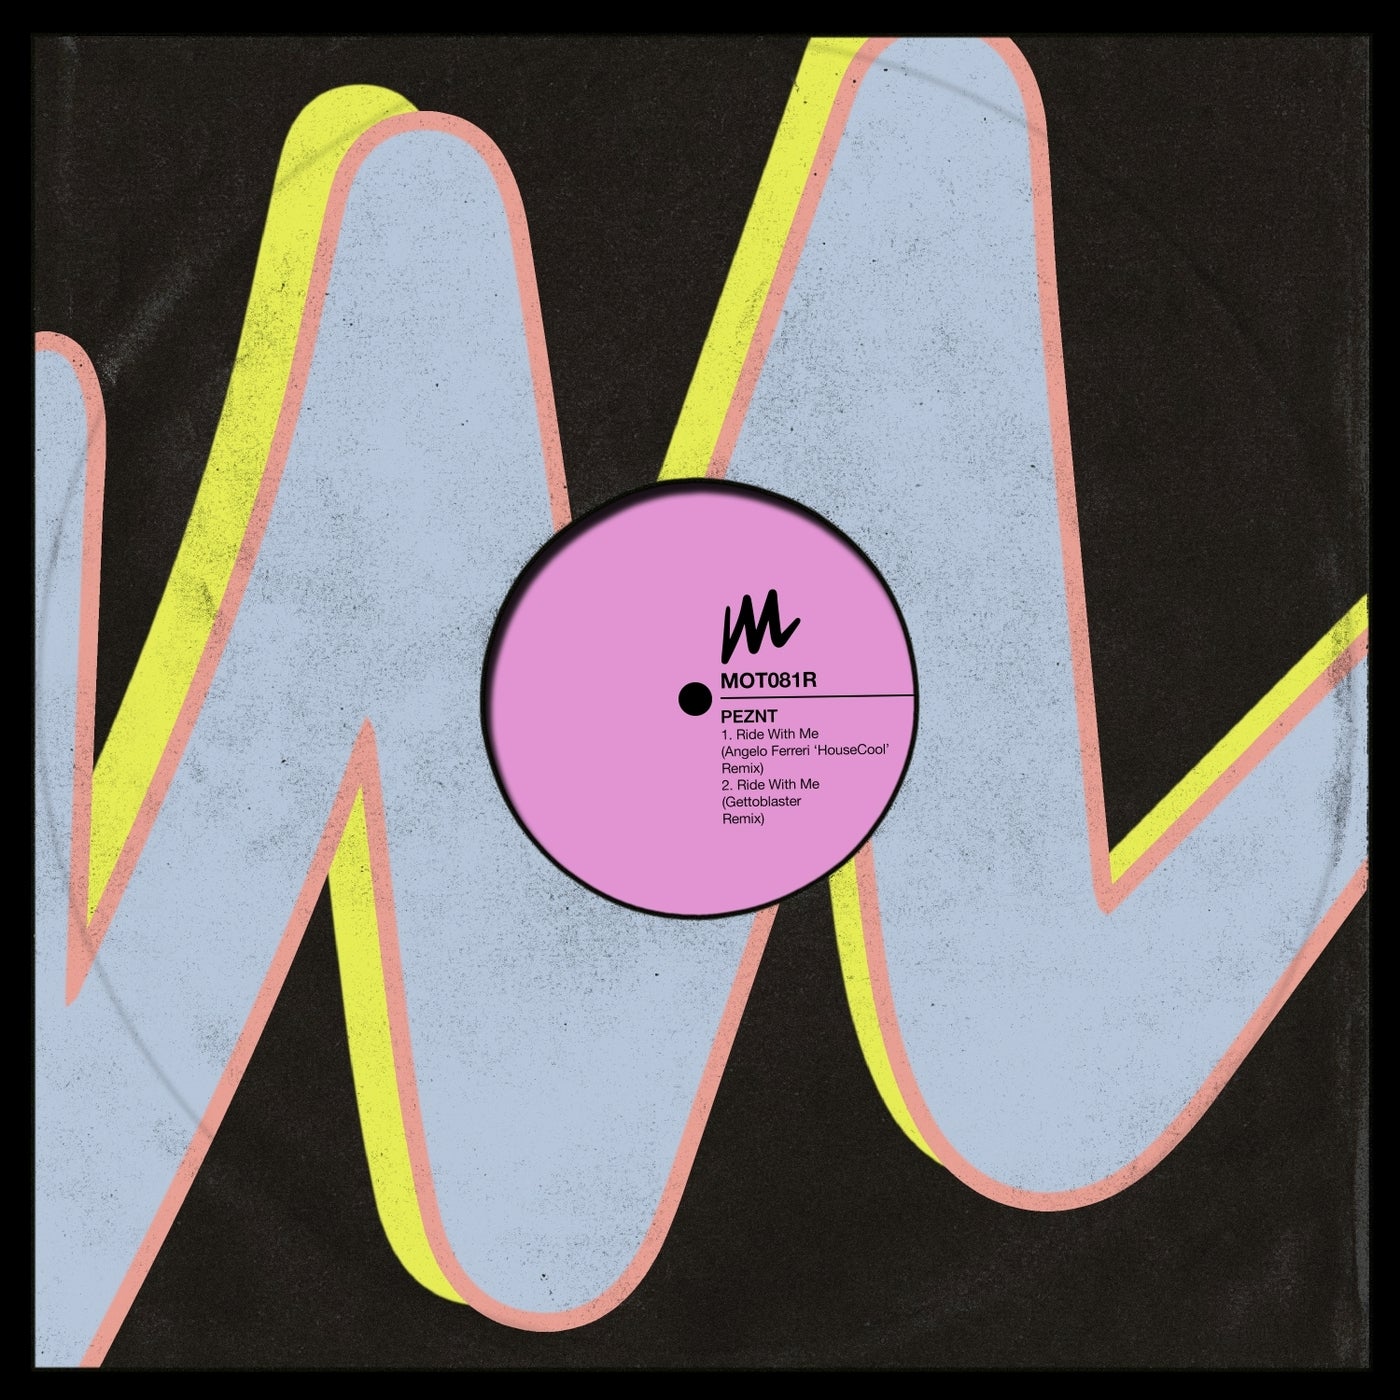 image cover: PEZNT - Ride with Me (Remixes) / MOT081R